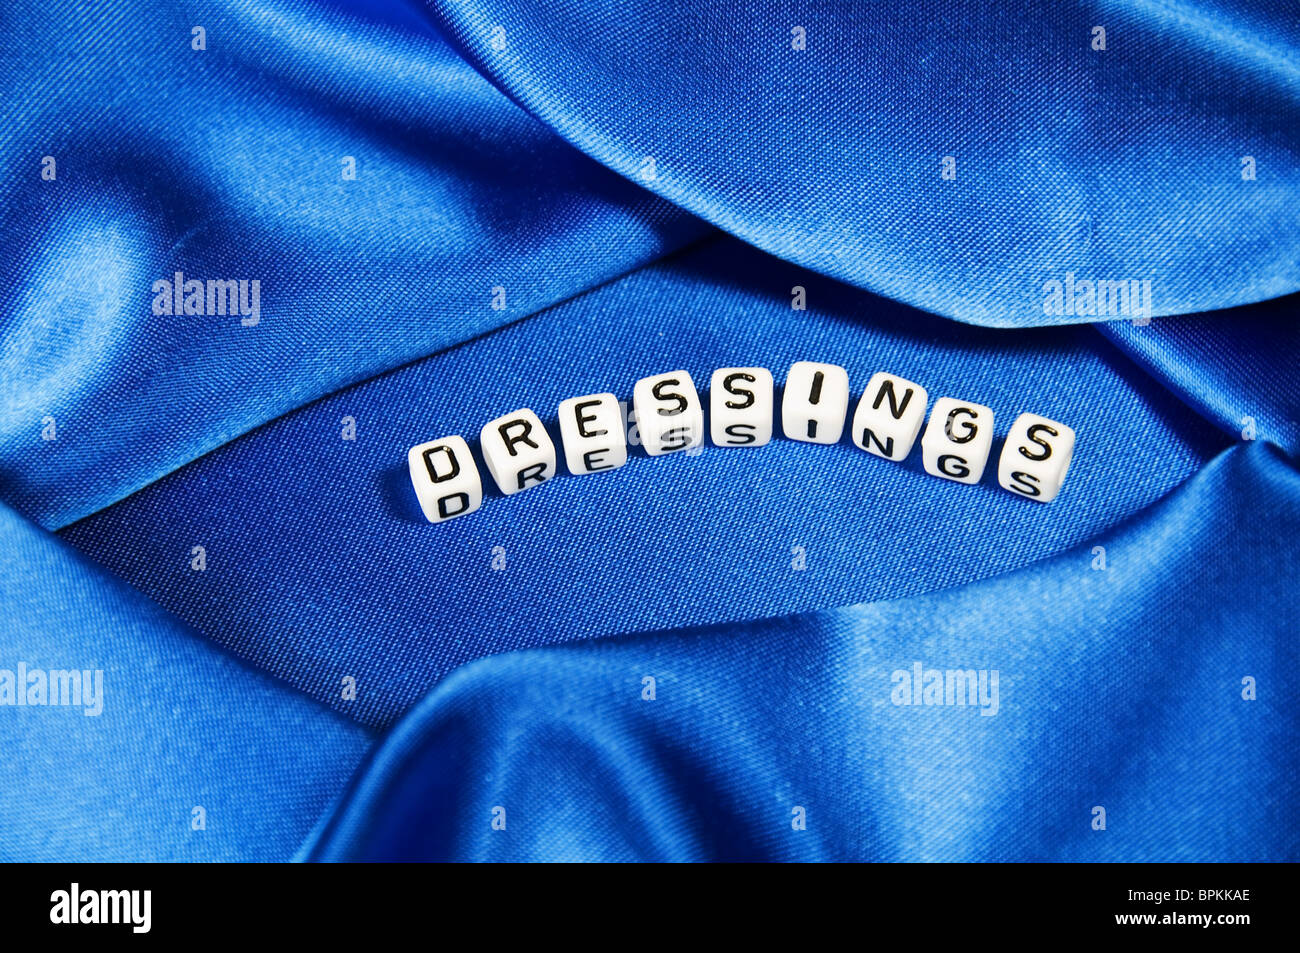 Royal blue satin background with rich folds and wrinkles for texture is the word dressings in cube lettering series Stock Photo